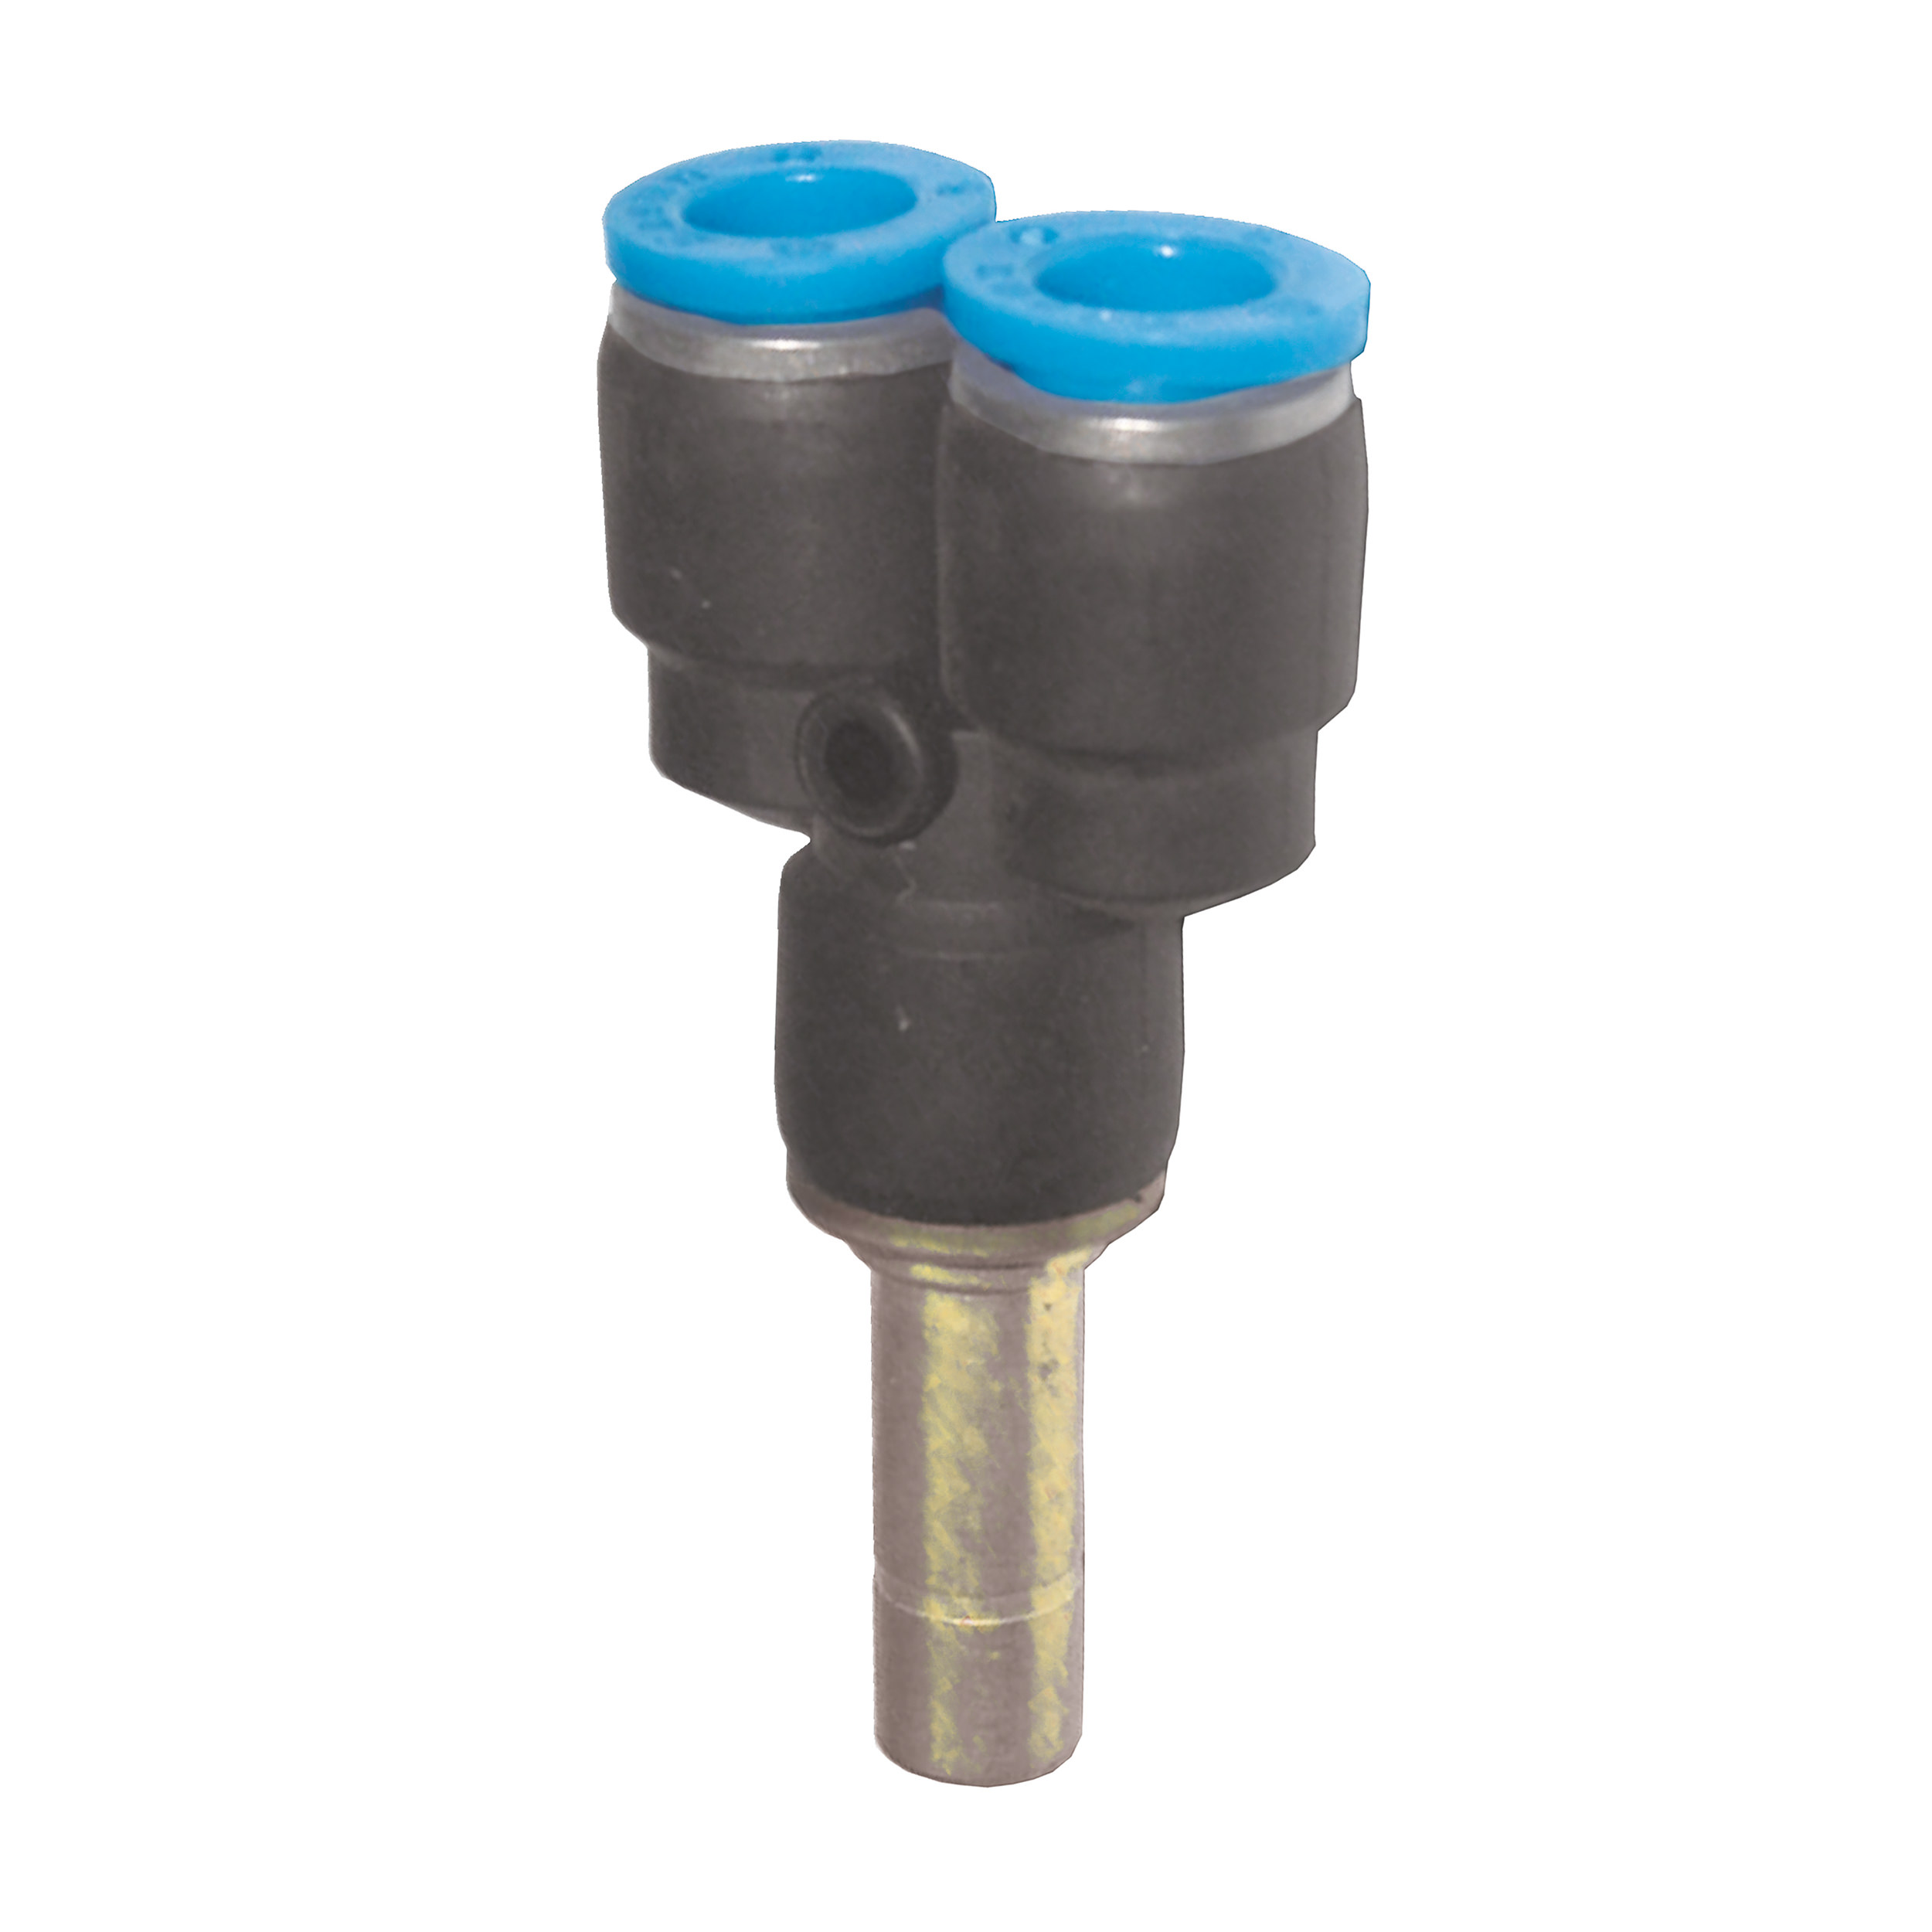 Push-in Y-connector, hose-Ø: 2 × D2 + 1 × D1: 4 mm, B (length): 51 mm, hose-Ød: 3 mm, max. operating pressure: 145 psi, with plug